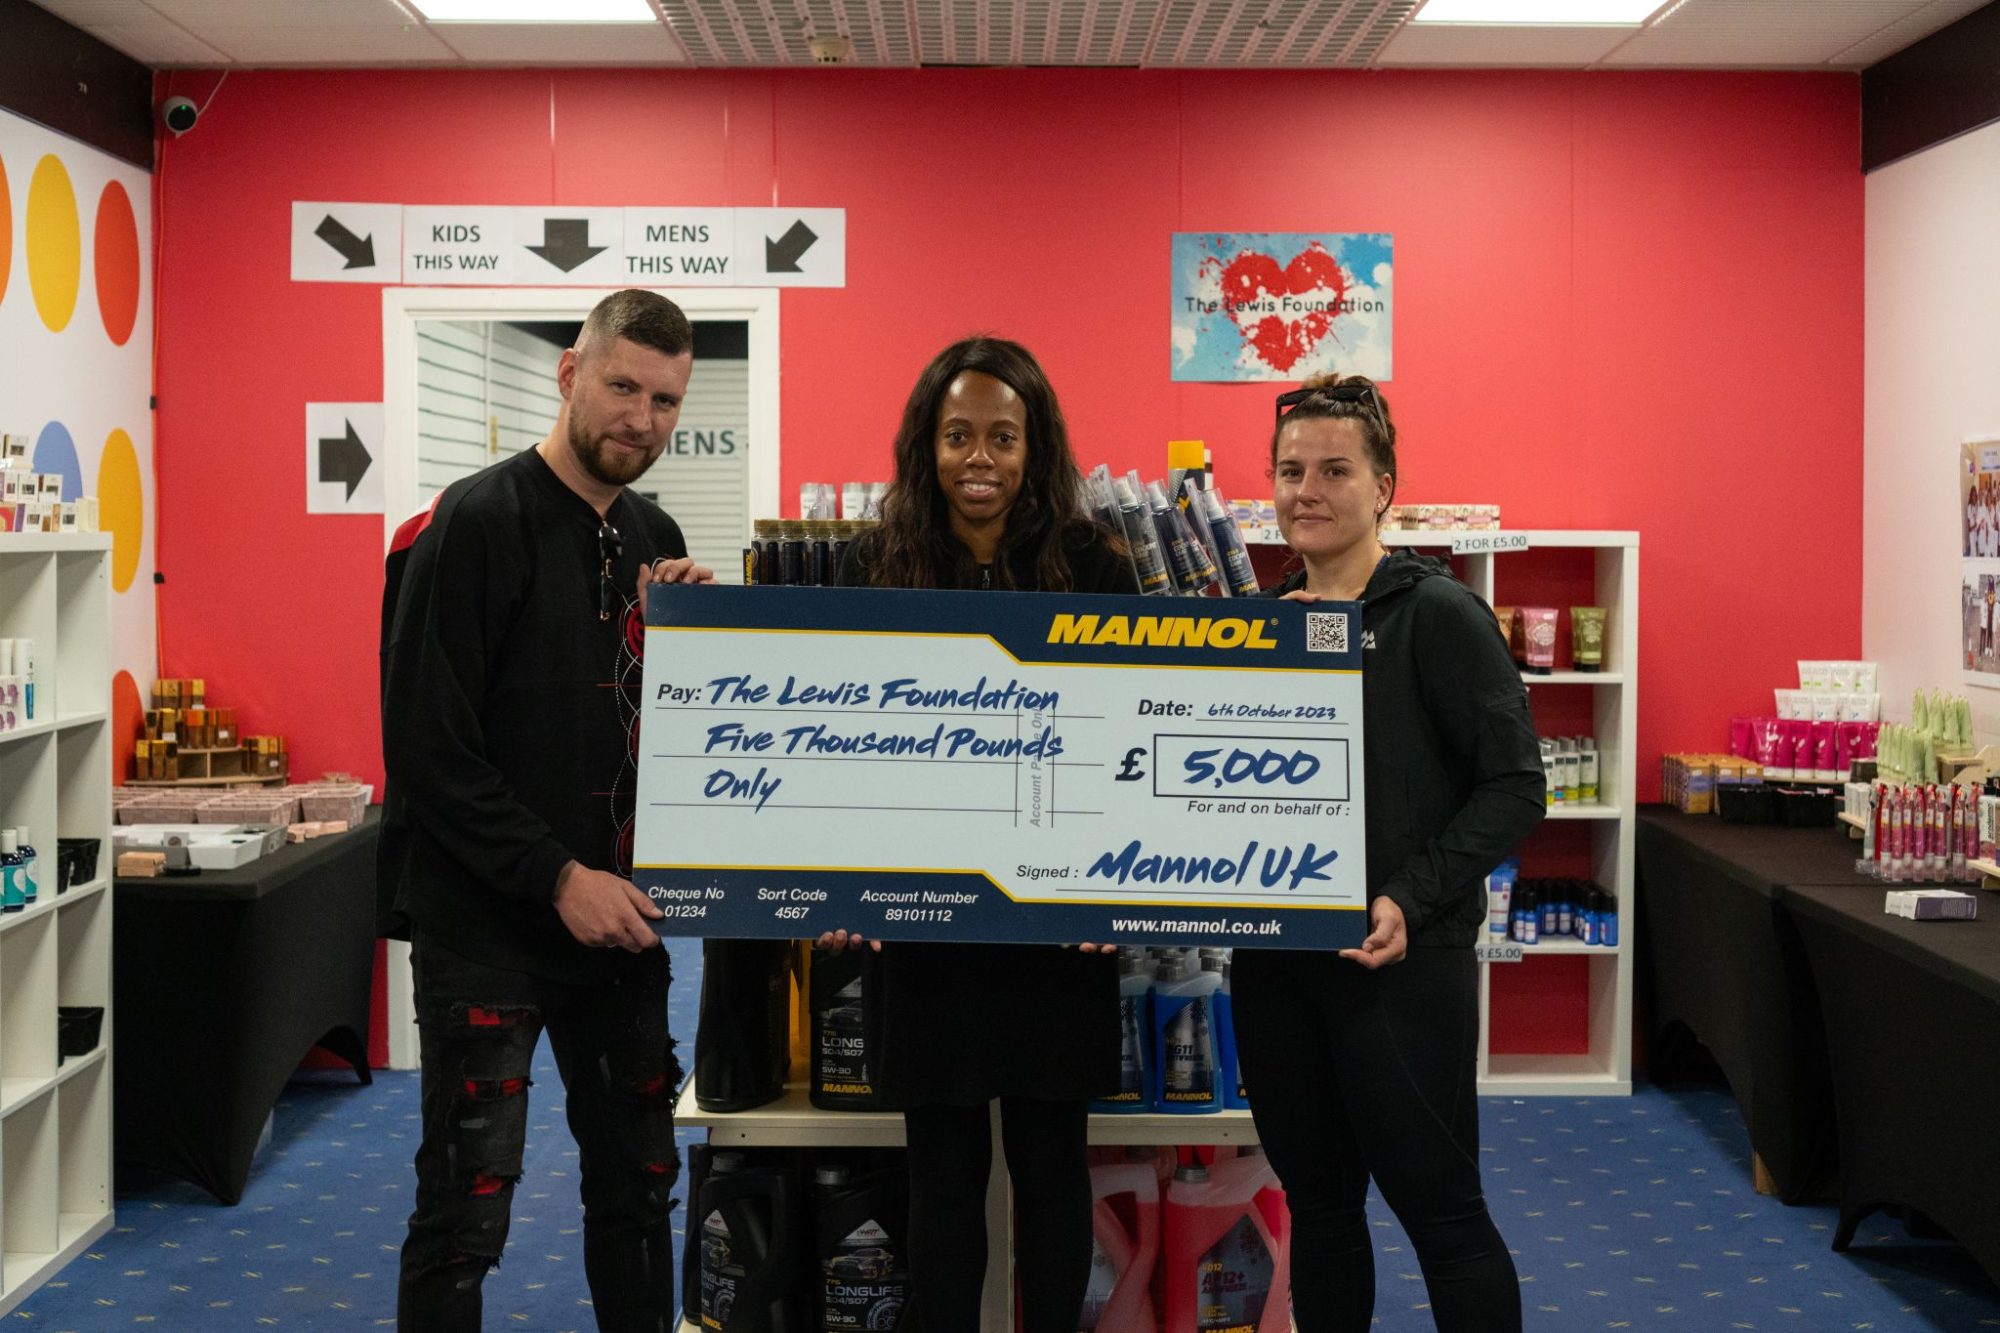 Donation of £5000 to The Lewis Foundation from Mannol UK.